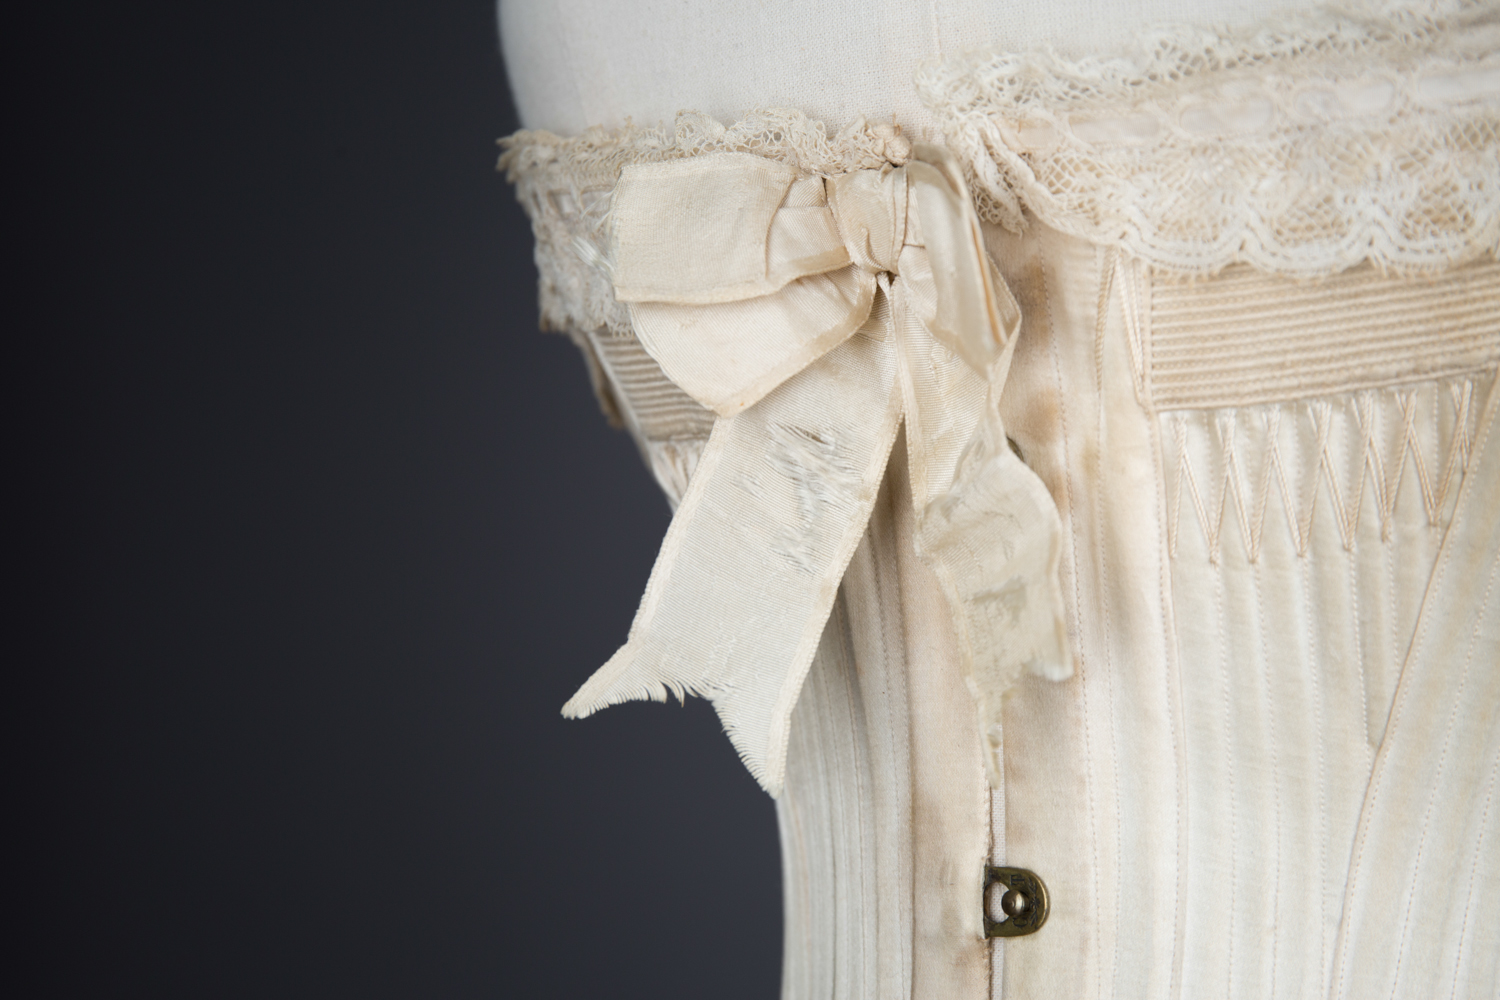 'Stella' Ivory Satin Corset With Flossing Embroidery & Cording by C. T., c. 1900, made in France for the USA market. The Underpinnings Museum. Photography by Tigz Rice.